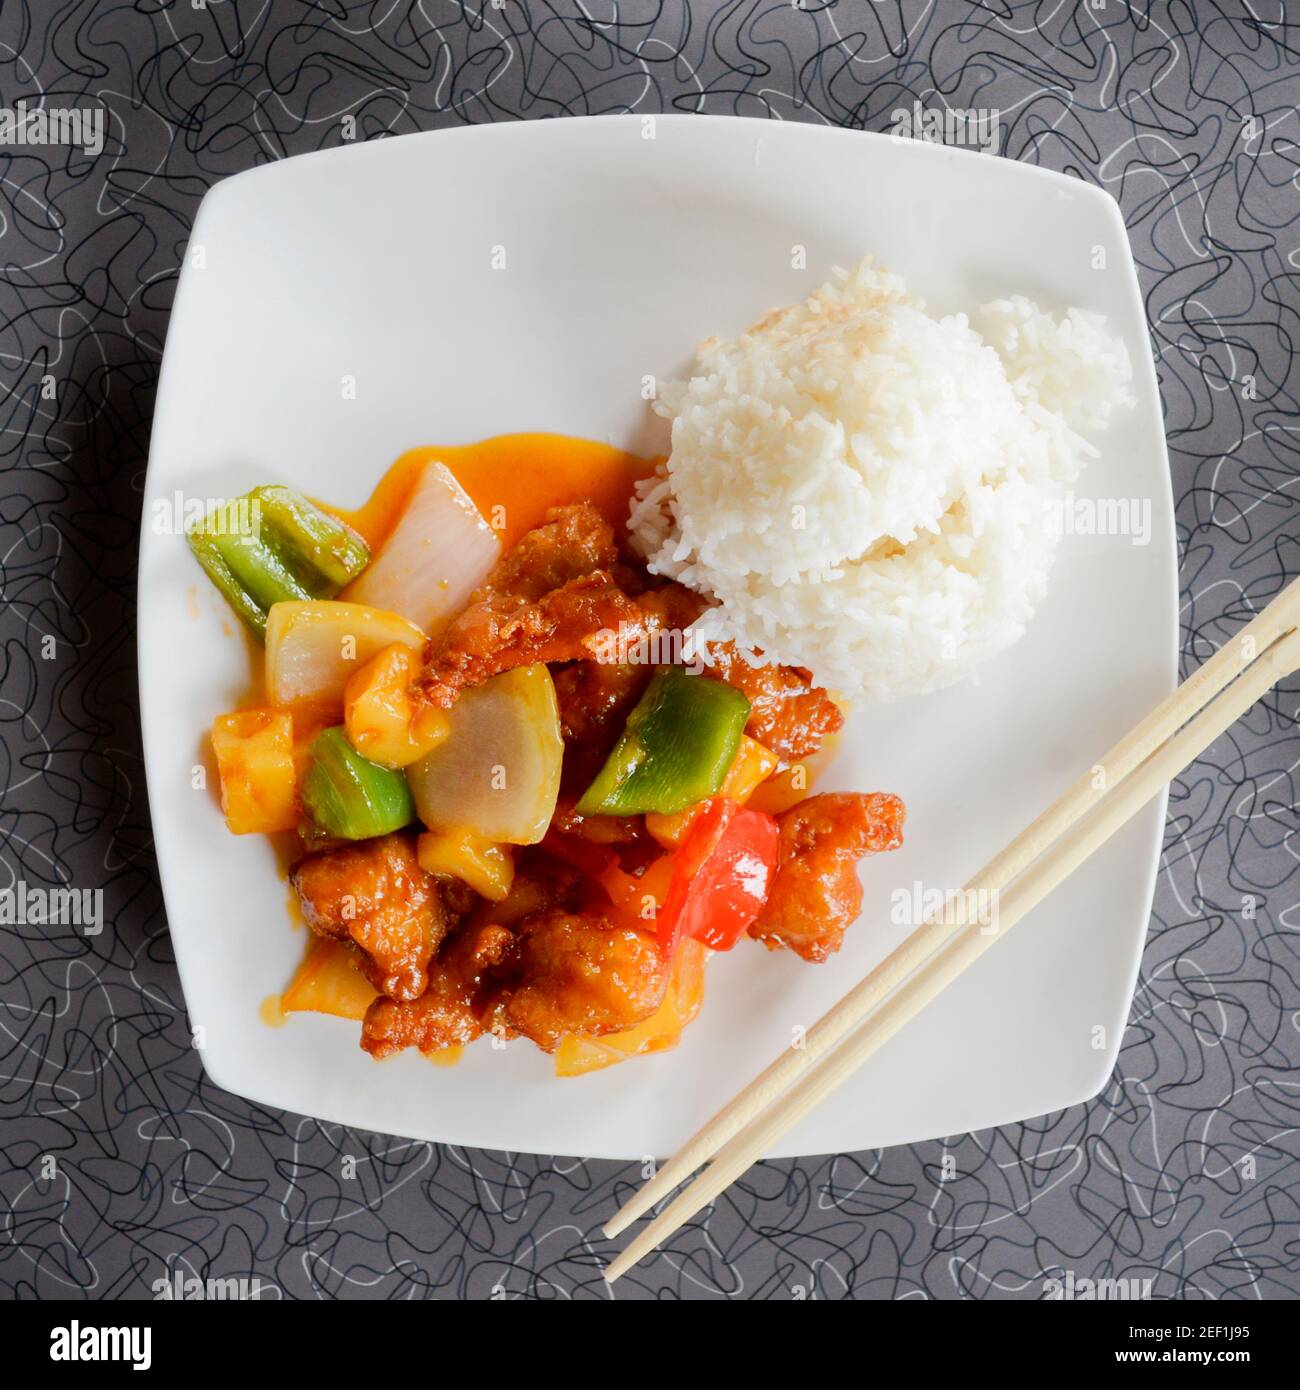 Food photography, Sweet and Sour chicken, Chinese food Stock Photo